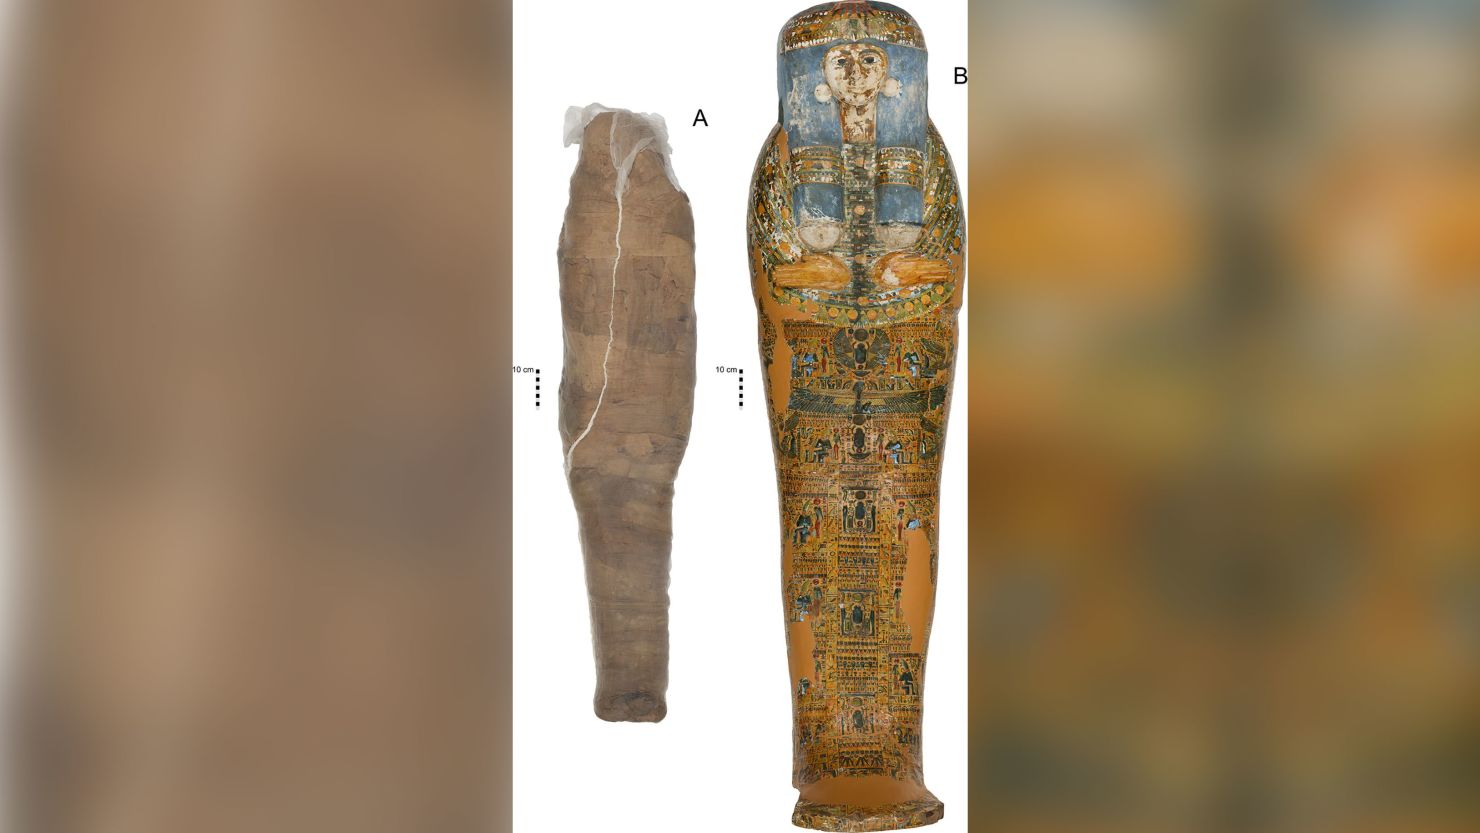 The identity of a mummified individual — in a coffin in the Nicholson Collection of the Chau Chak Wing Museum, University of Sydney — may have been mistaken.